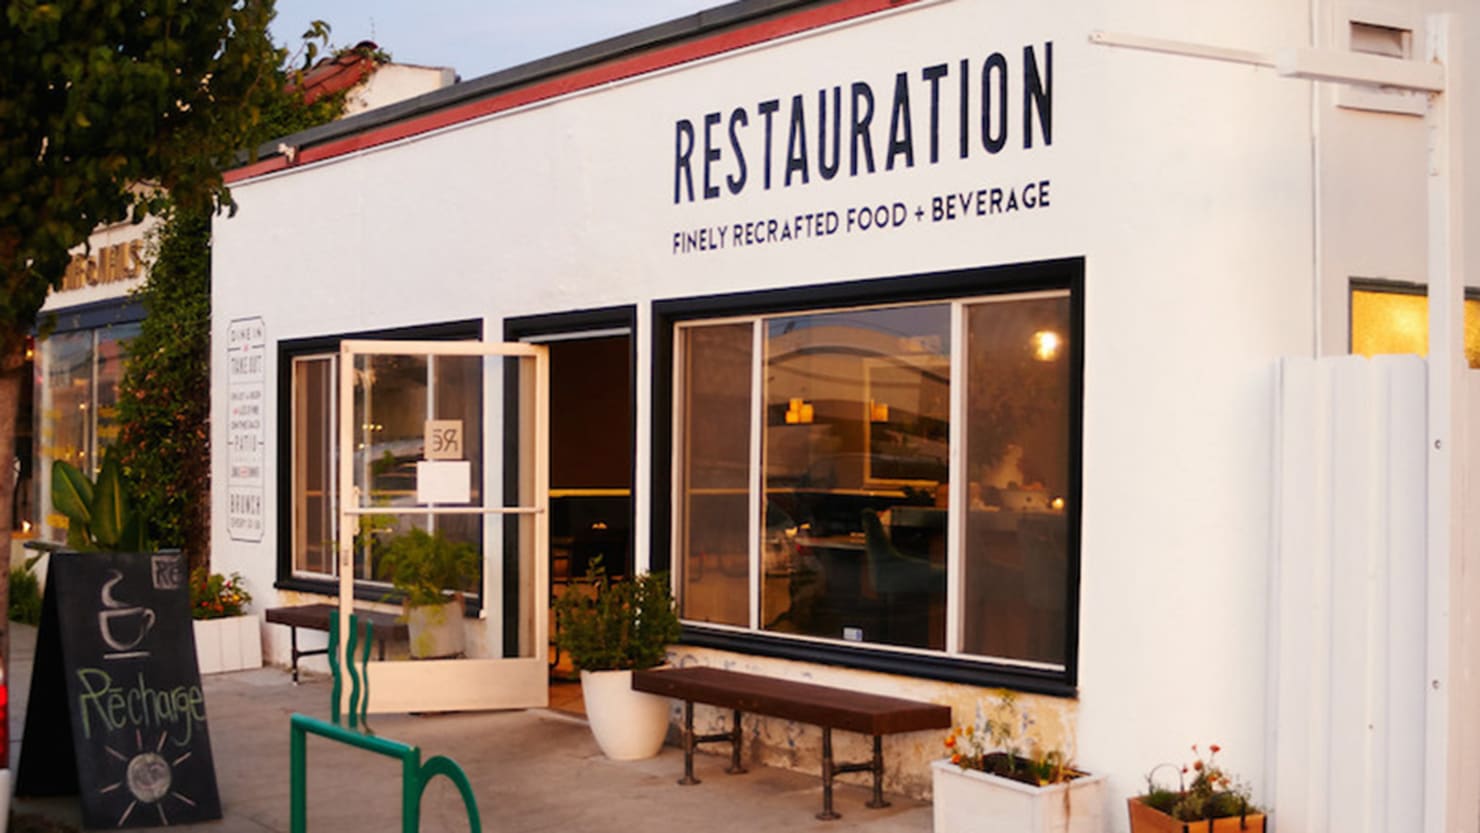 Breaking the rules, restaurant restoration in Long Beach LA has become their pandemic nightmare